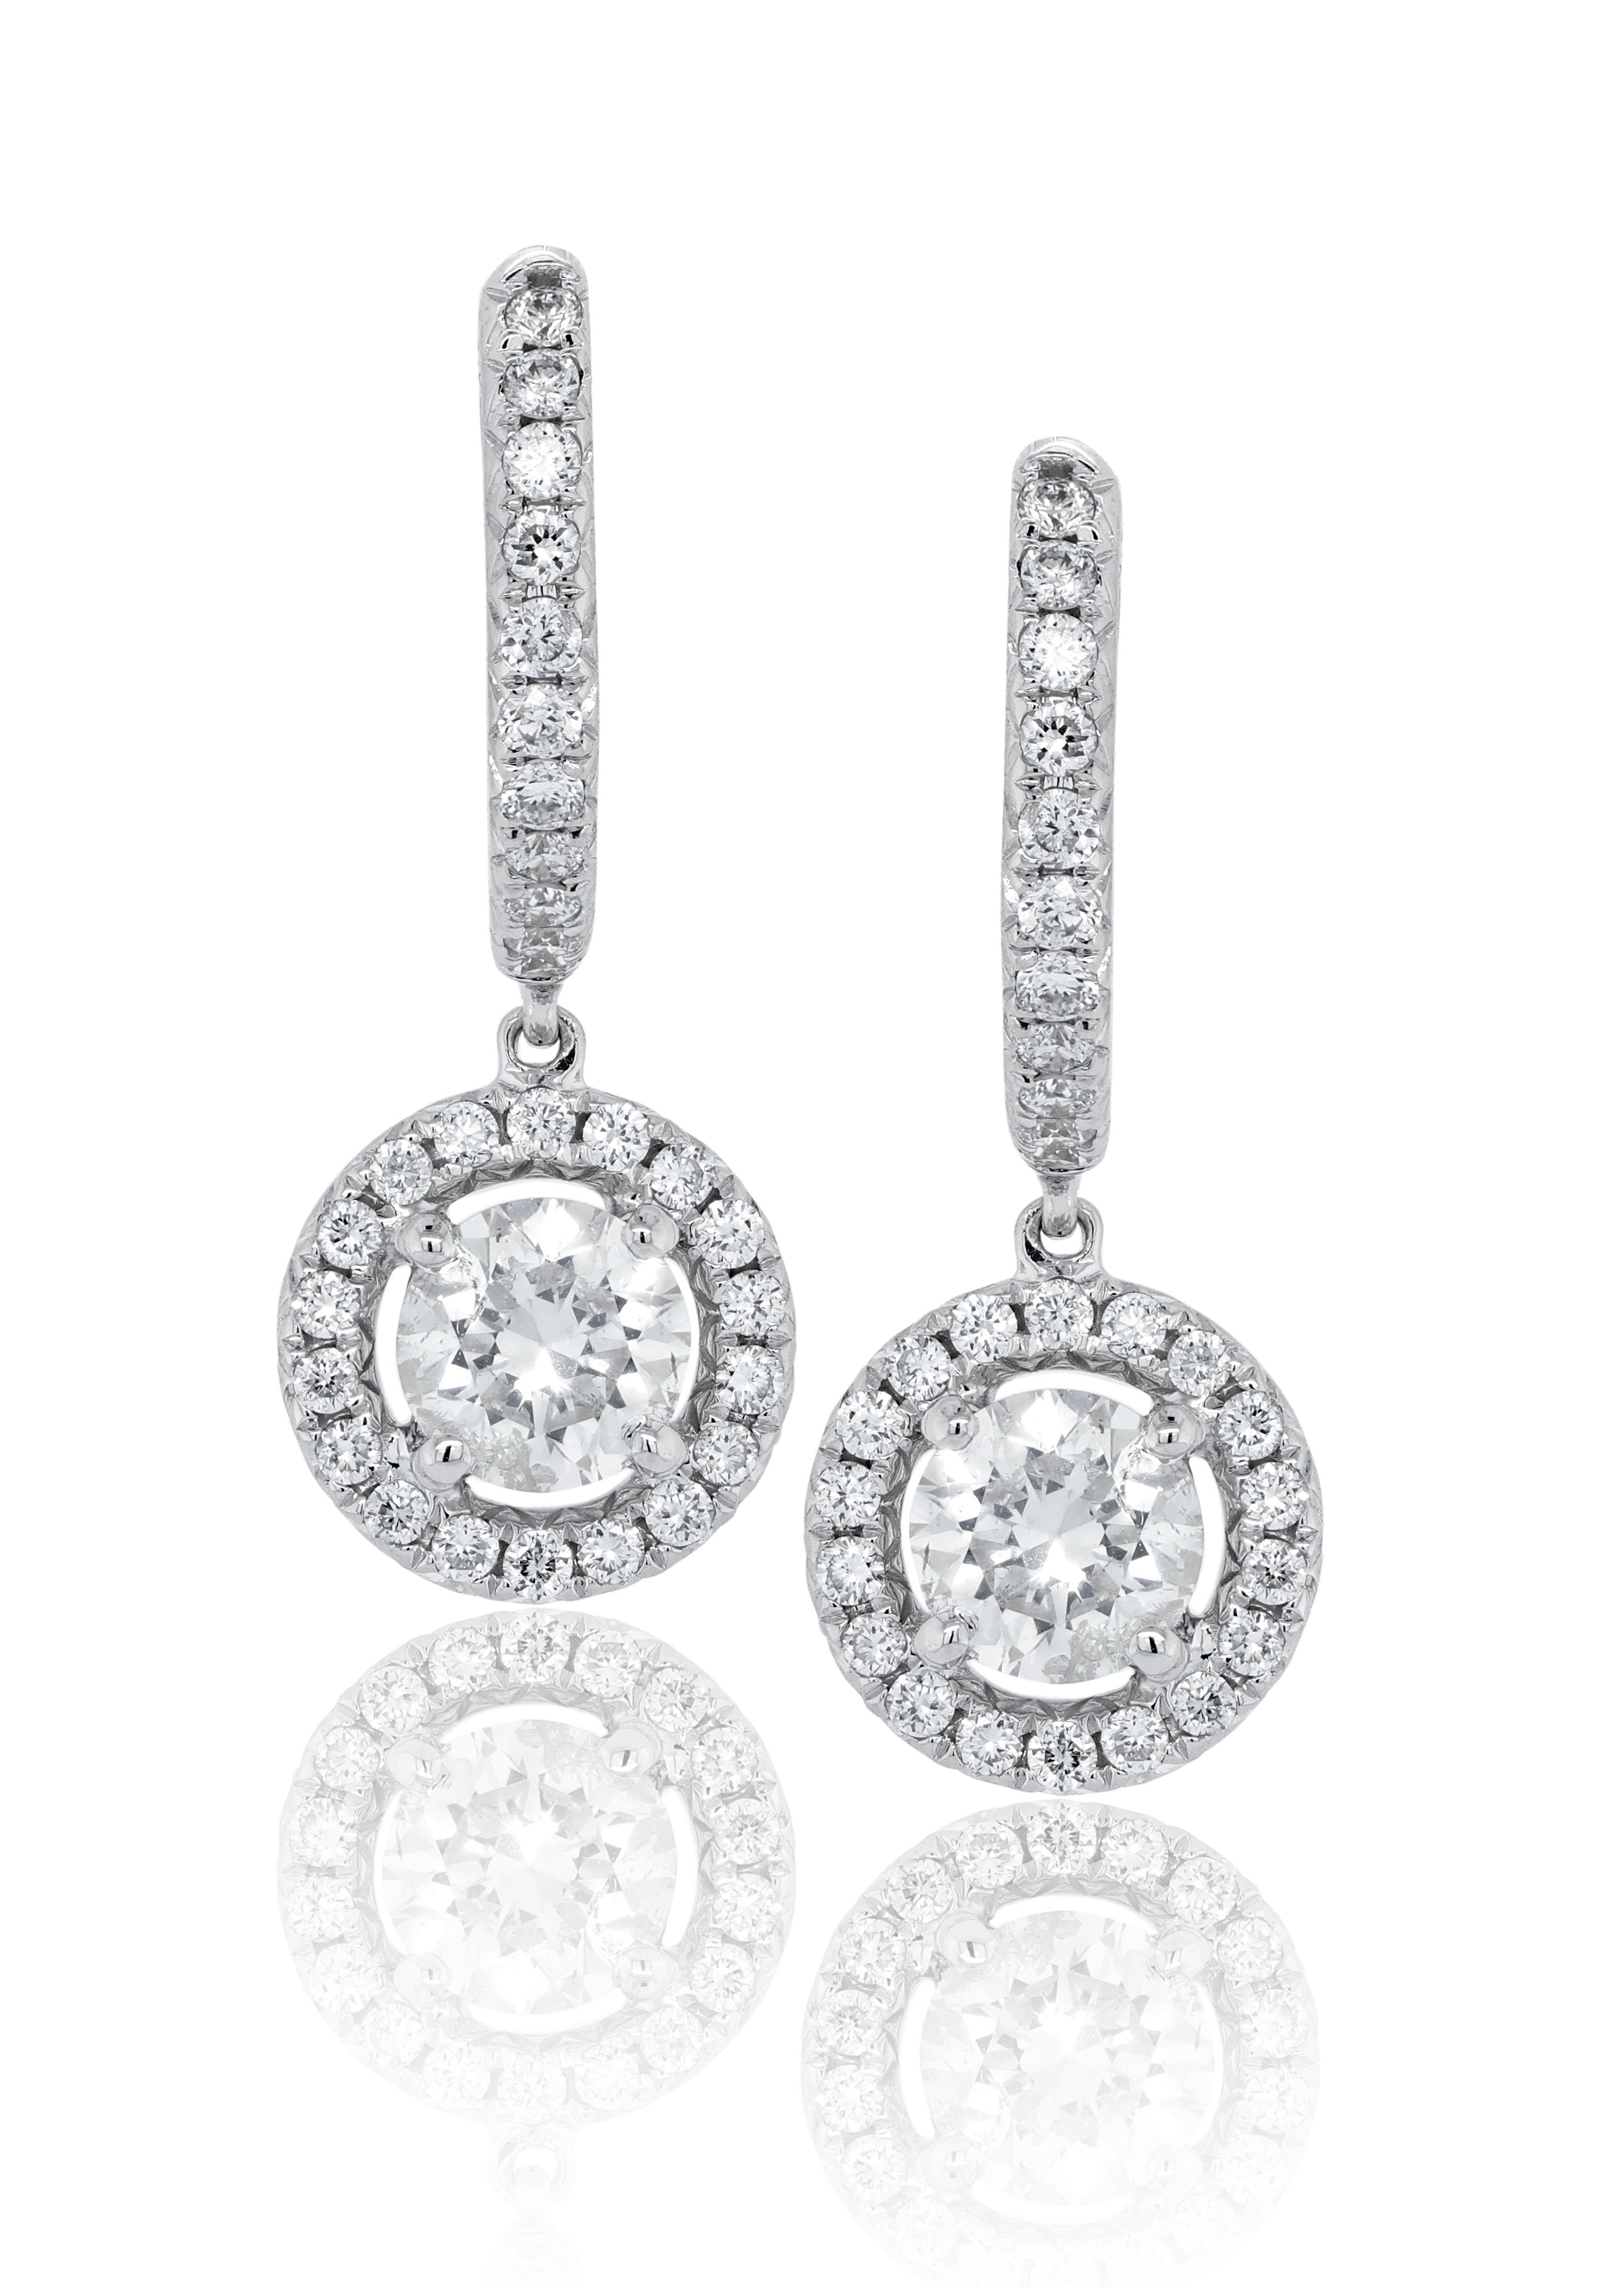 14kt white gold hanging earrings featuring 1.20 cts tw of round diamonds 
Diana M. is a leading supplier of top-quality fine jewelry for over 35 years.
Diana M is one-stop shop for all your jewelry shopping, carrying line of diamond rings, earrings,